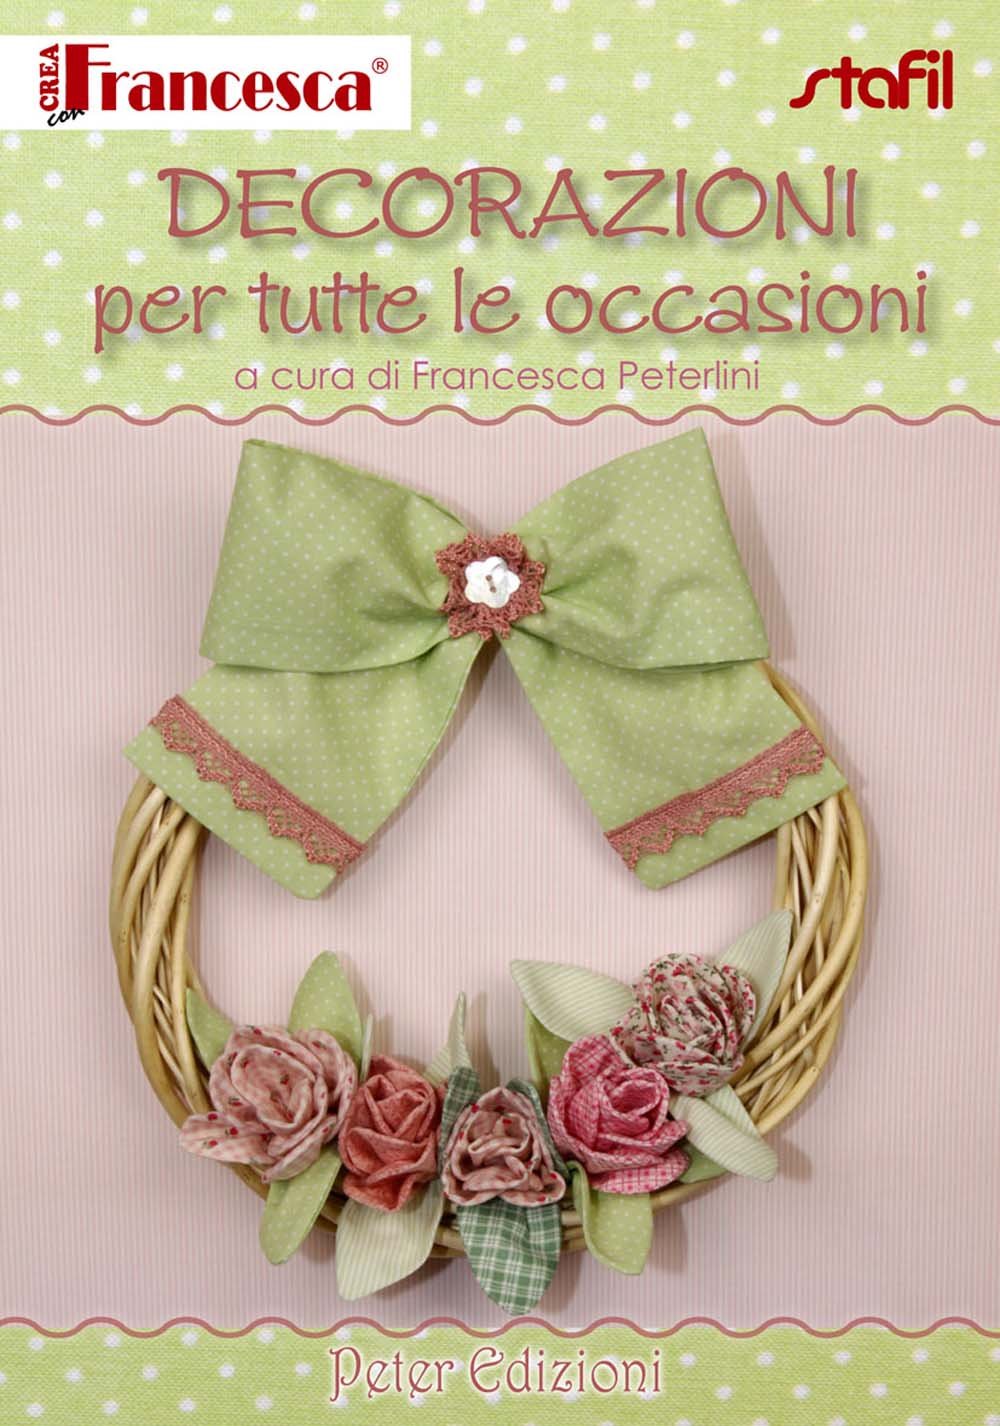 Decorations for all occasions - Francesca Peterlini